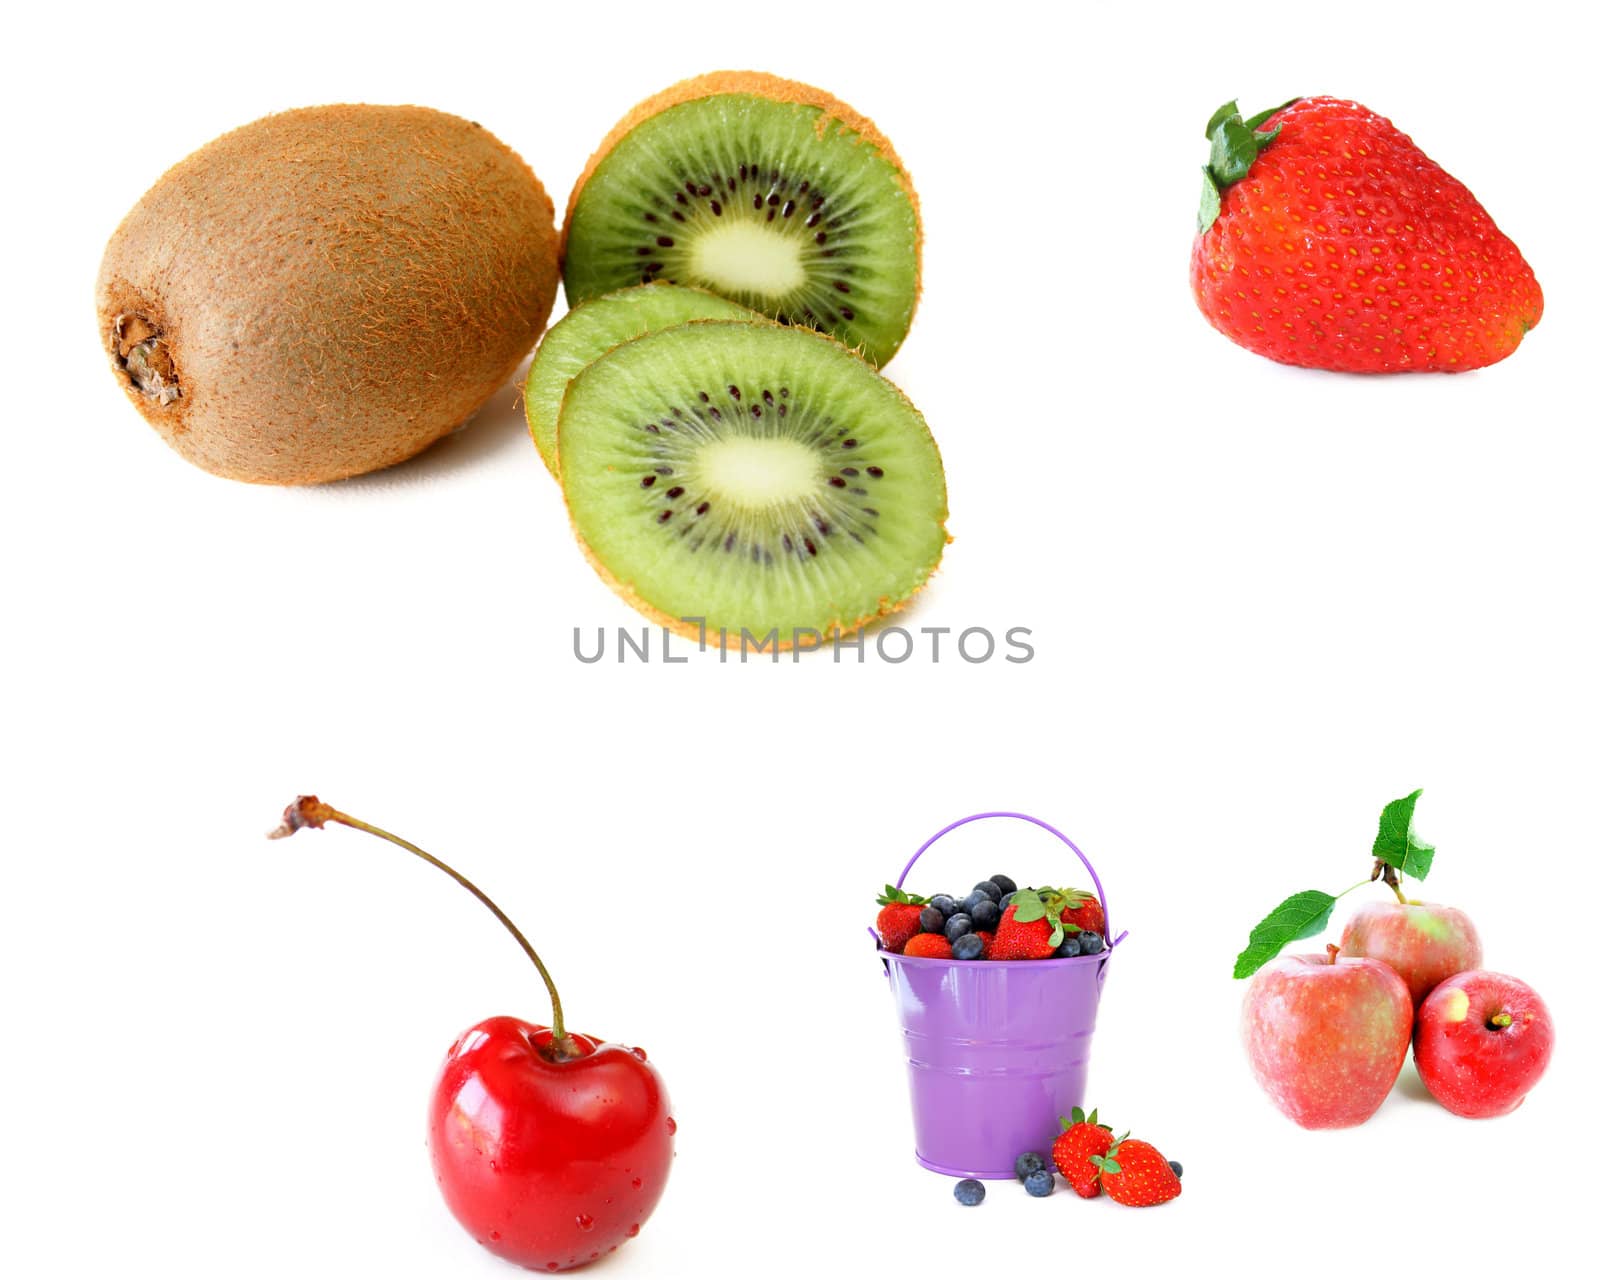 Fruit Collage by thephotoguy